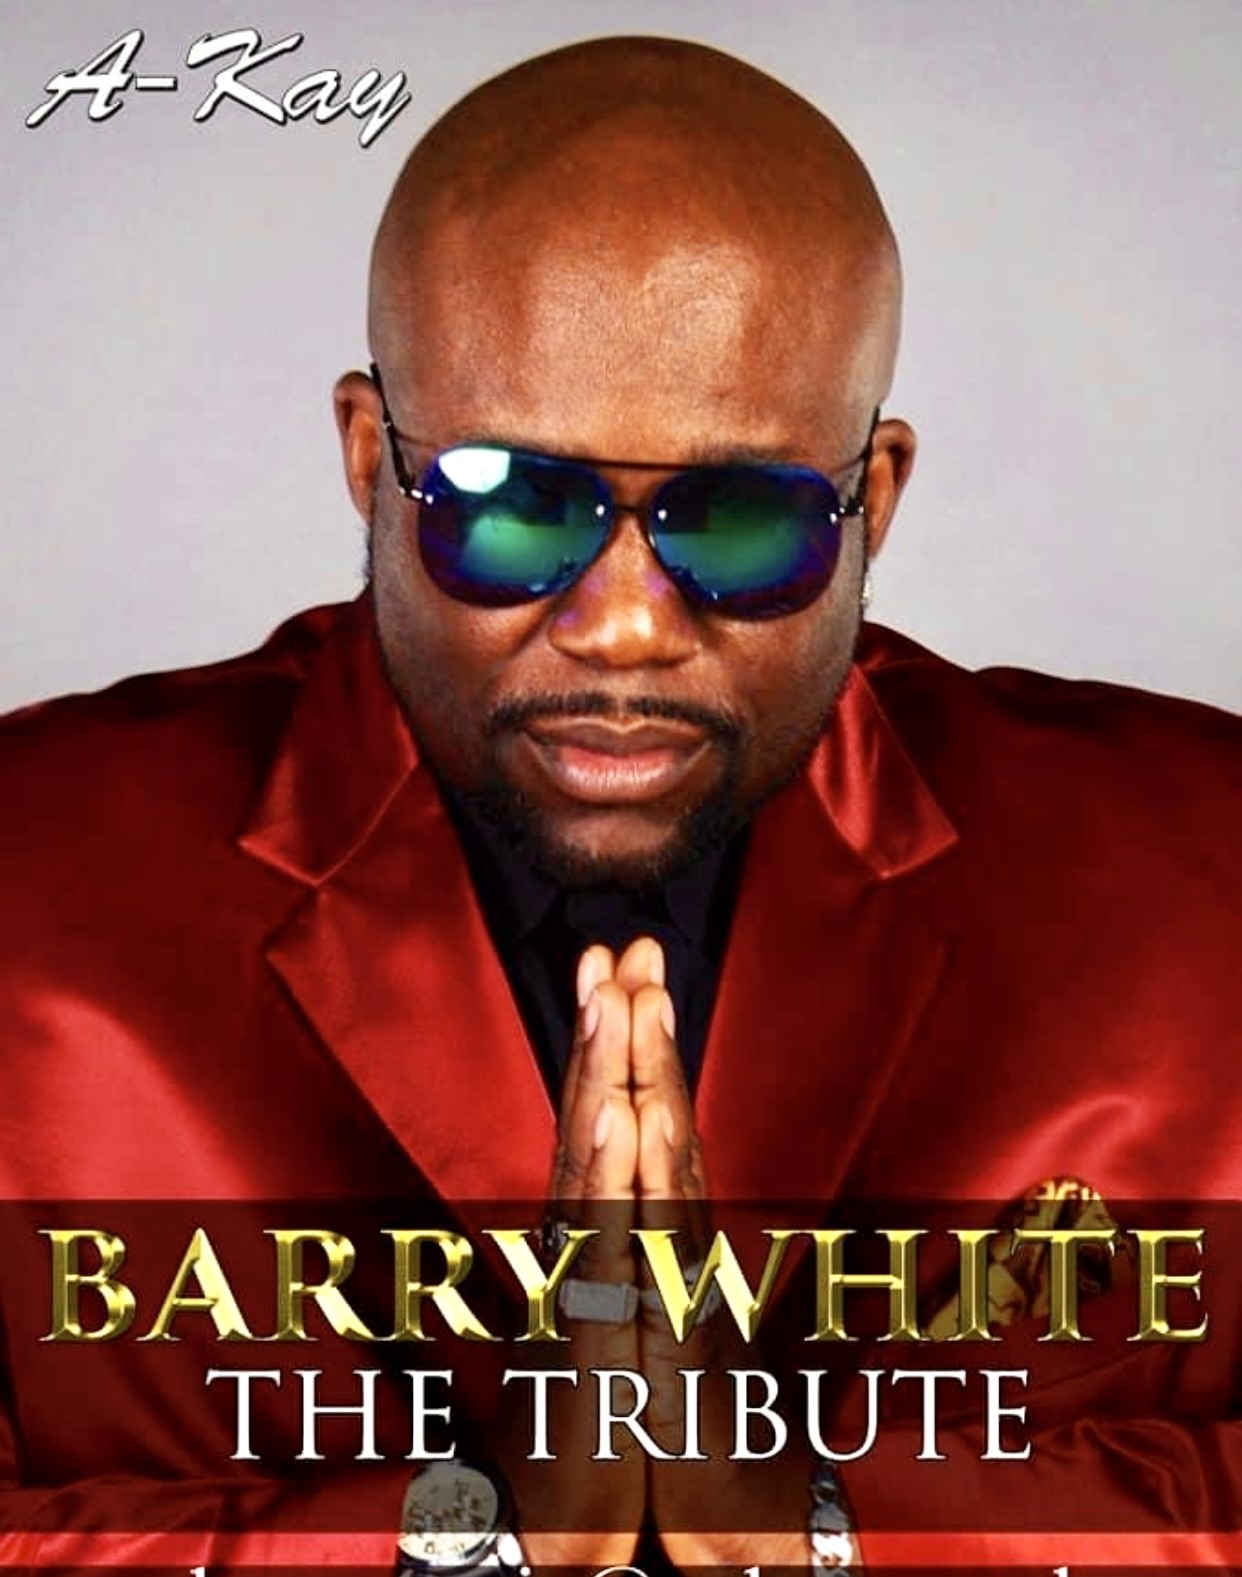 BARRY WHITE - The Tribute at Peel Centenary Centre  on Mar 08, 19:30@Peel Centenary Centre - Buy tickets and Get information on RS PROMOTIONS 